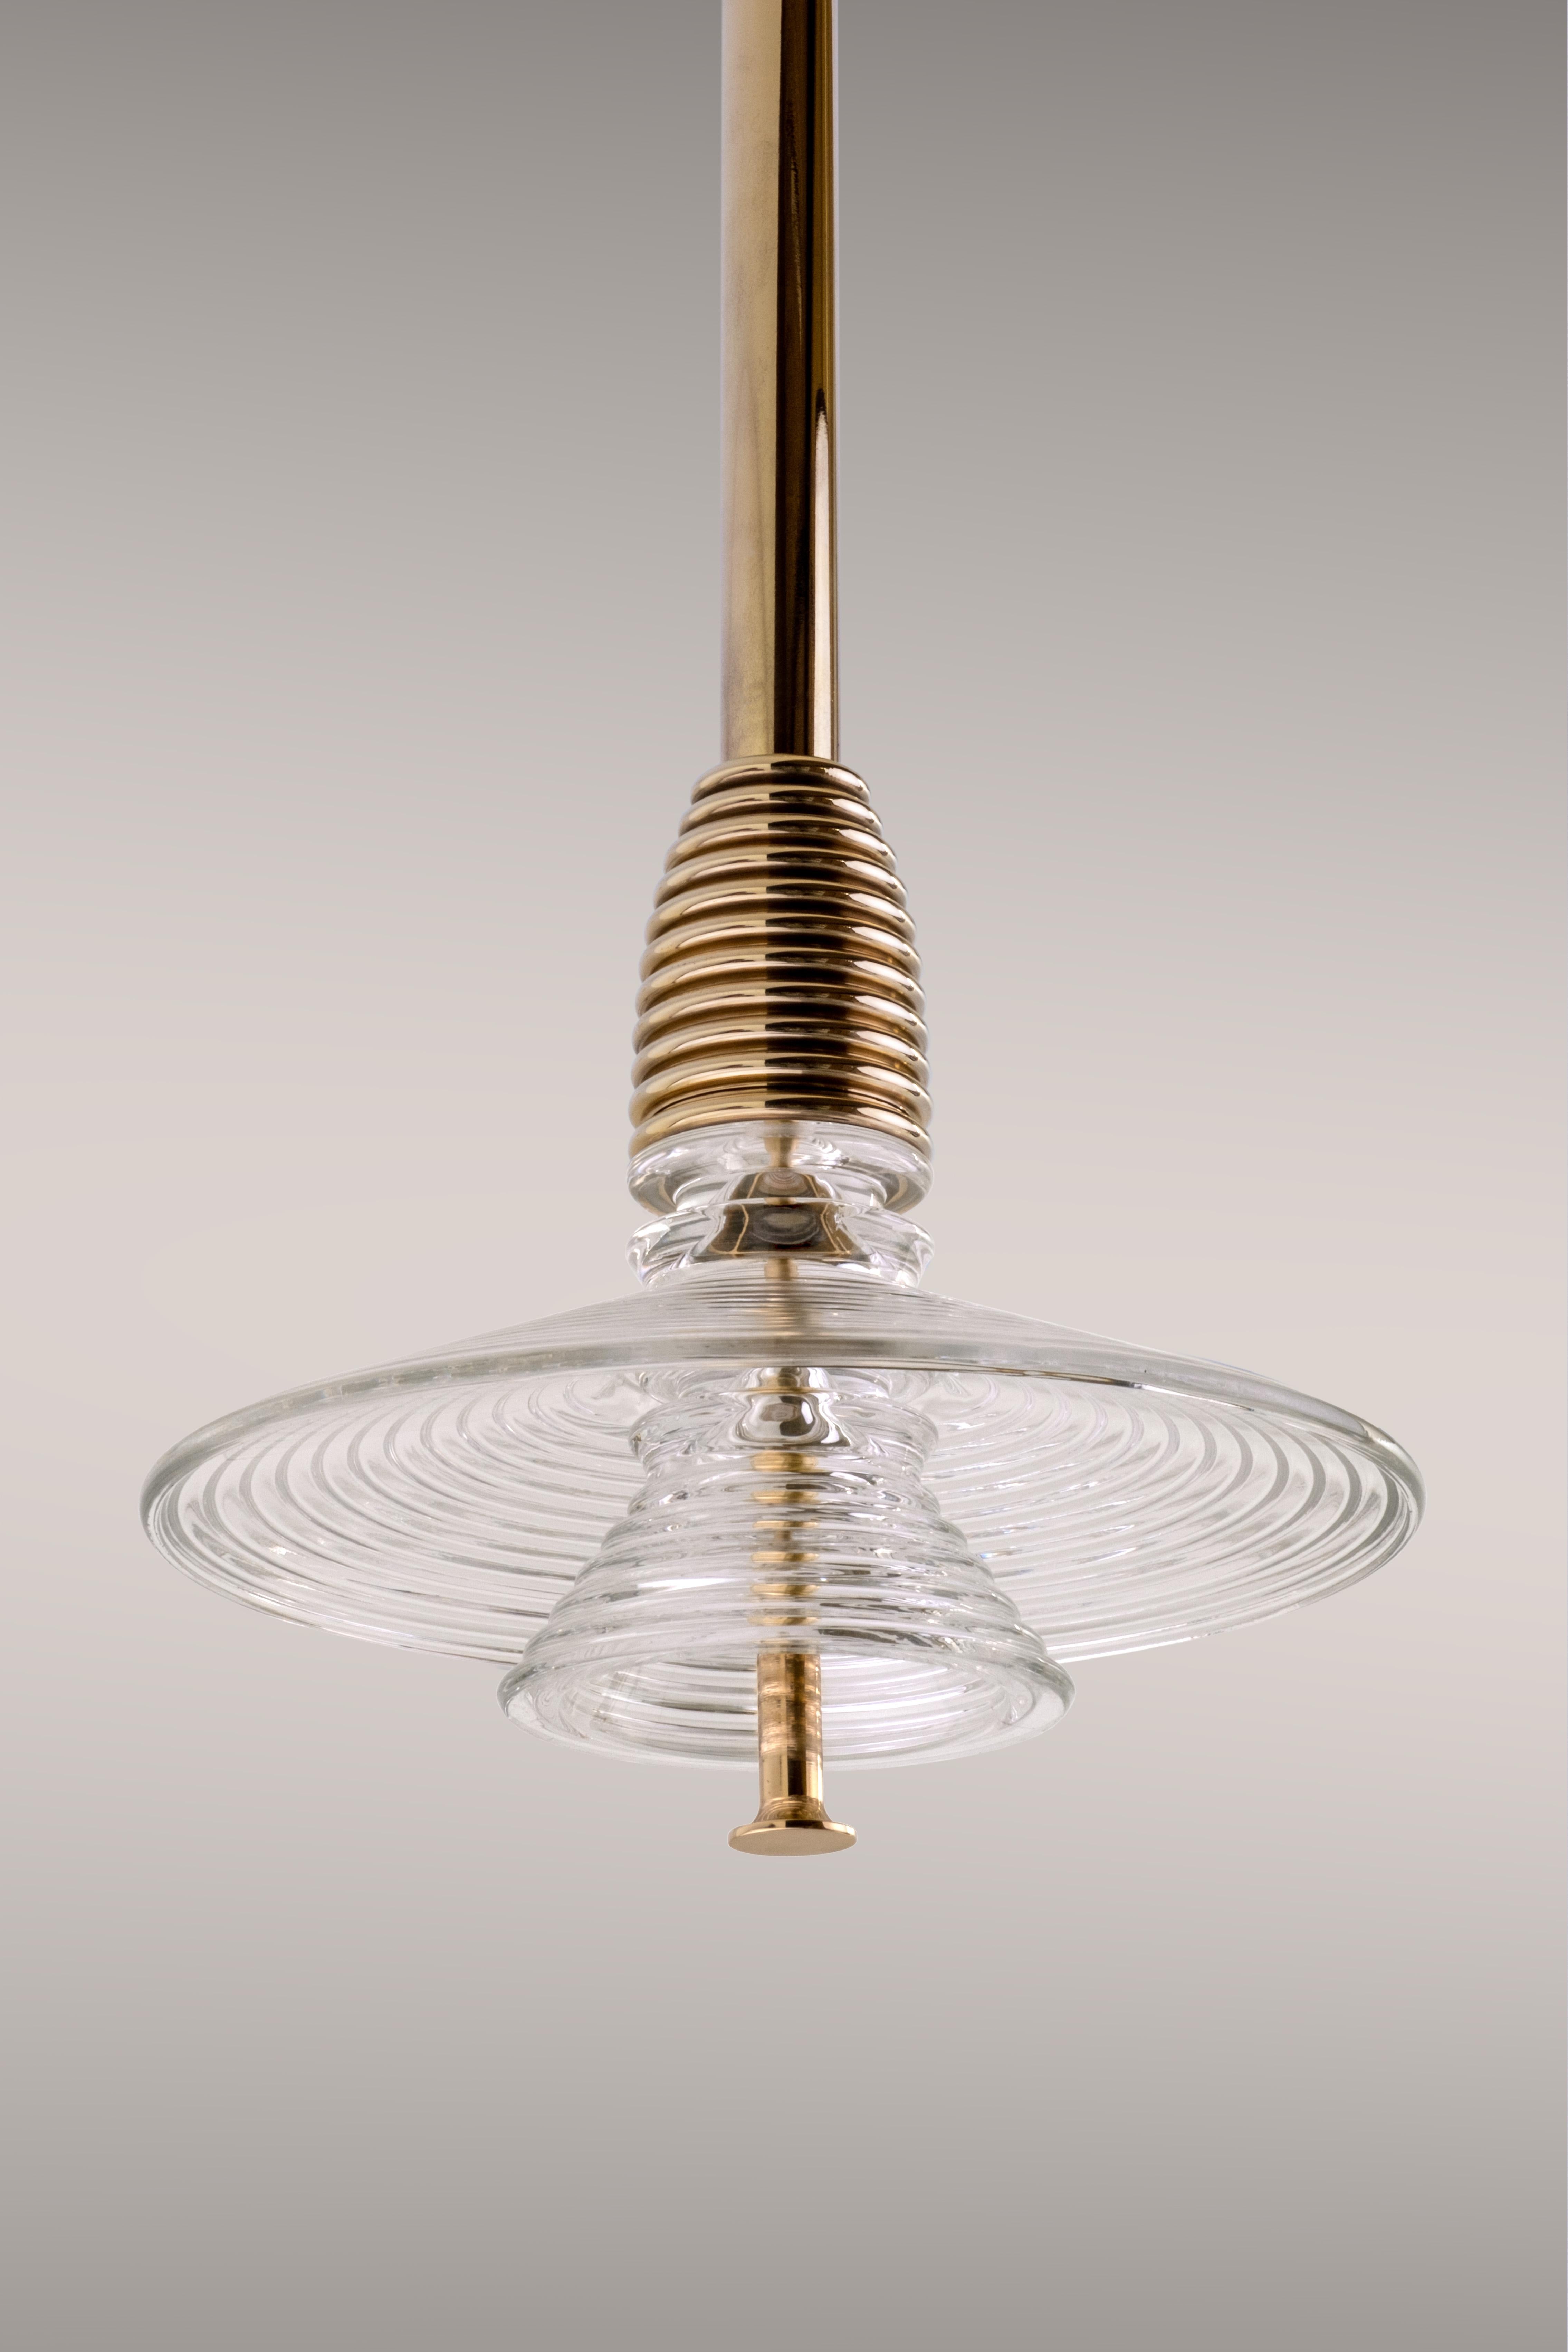 The Insulator 'AB' Pendant in dark brass and frosted glass by NOVOCASTRIAN deco In New Condition For Sale In Washington, GB